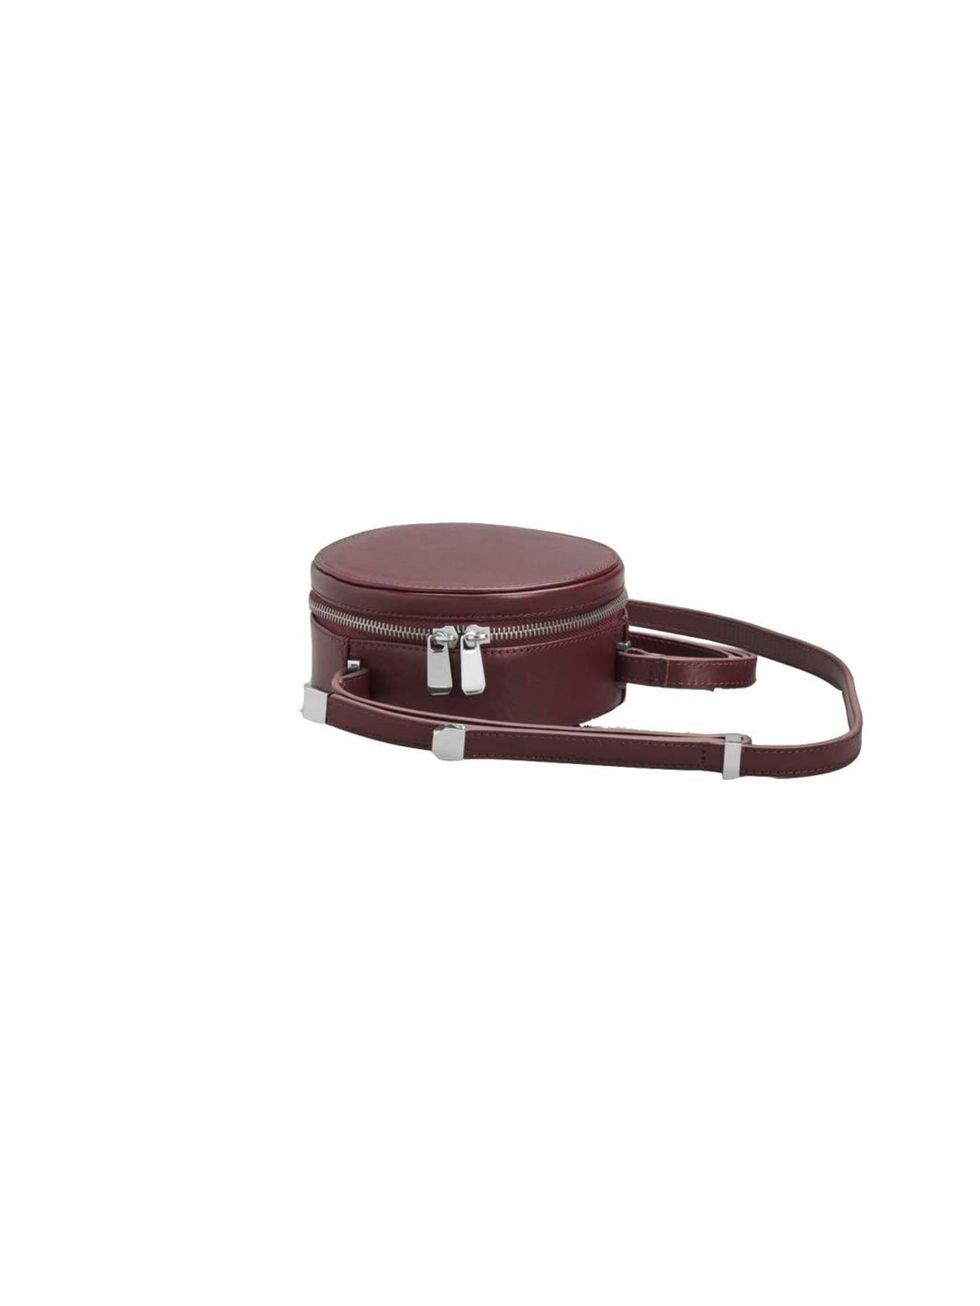 <p>This mini shoulder bag is a great alternative to a clutch for a night out.</p><p>- Becky Hull, Beauty Intern</p><p><a href="http://www.stories.com/Bags/All_bags/Mini_leather_shoulder_bag/590765-657686.1">& Other Stories</a> bag, £45</p>